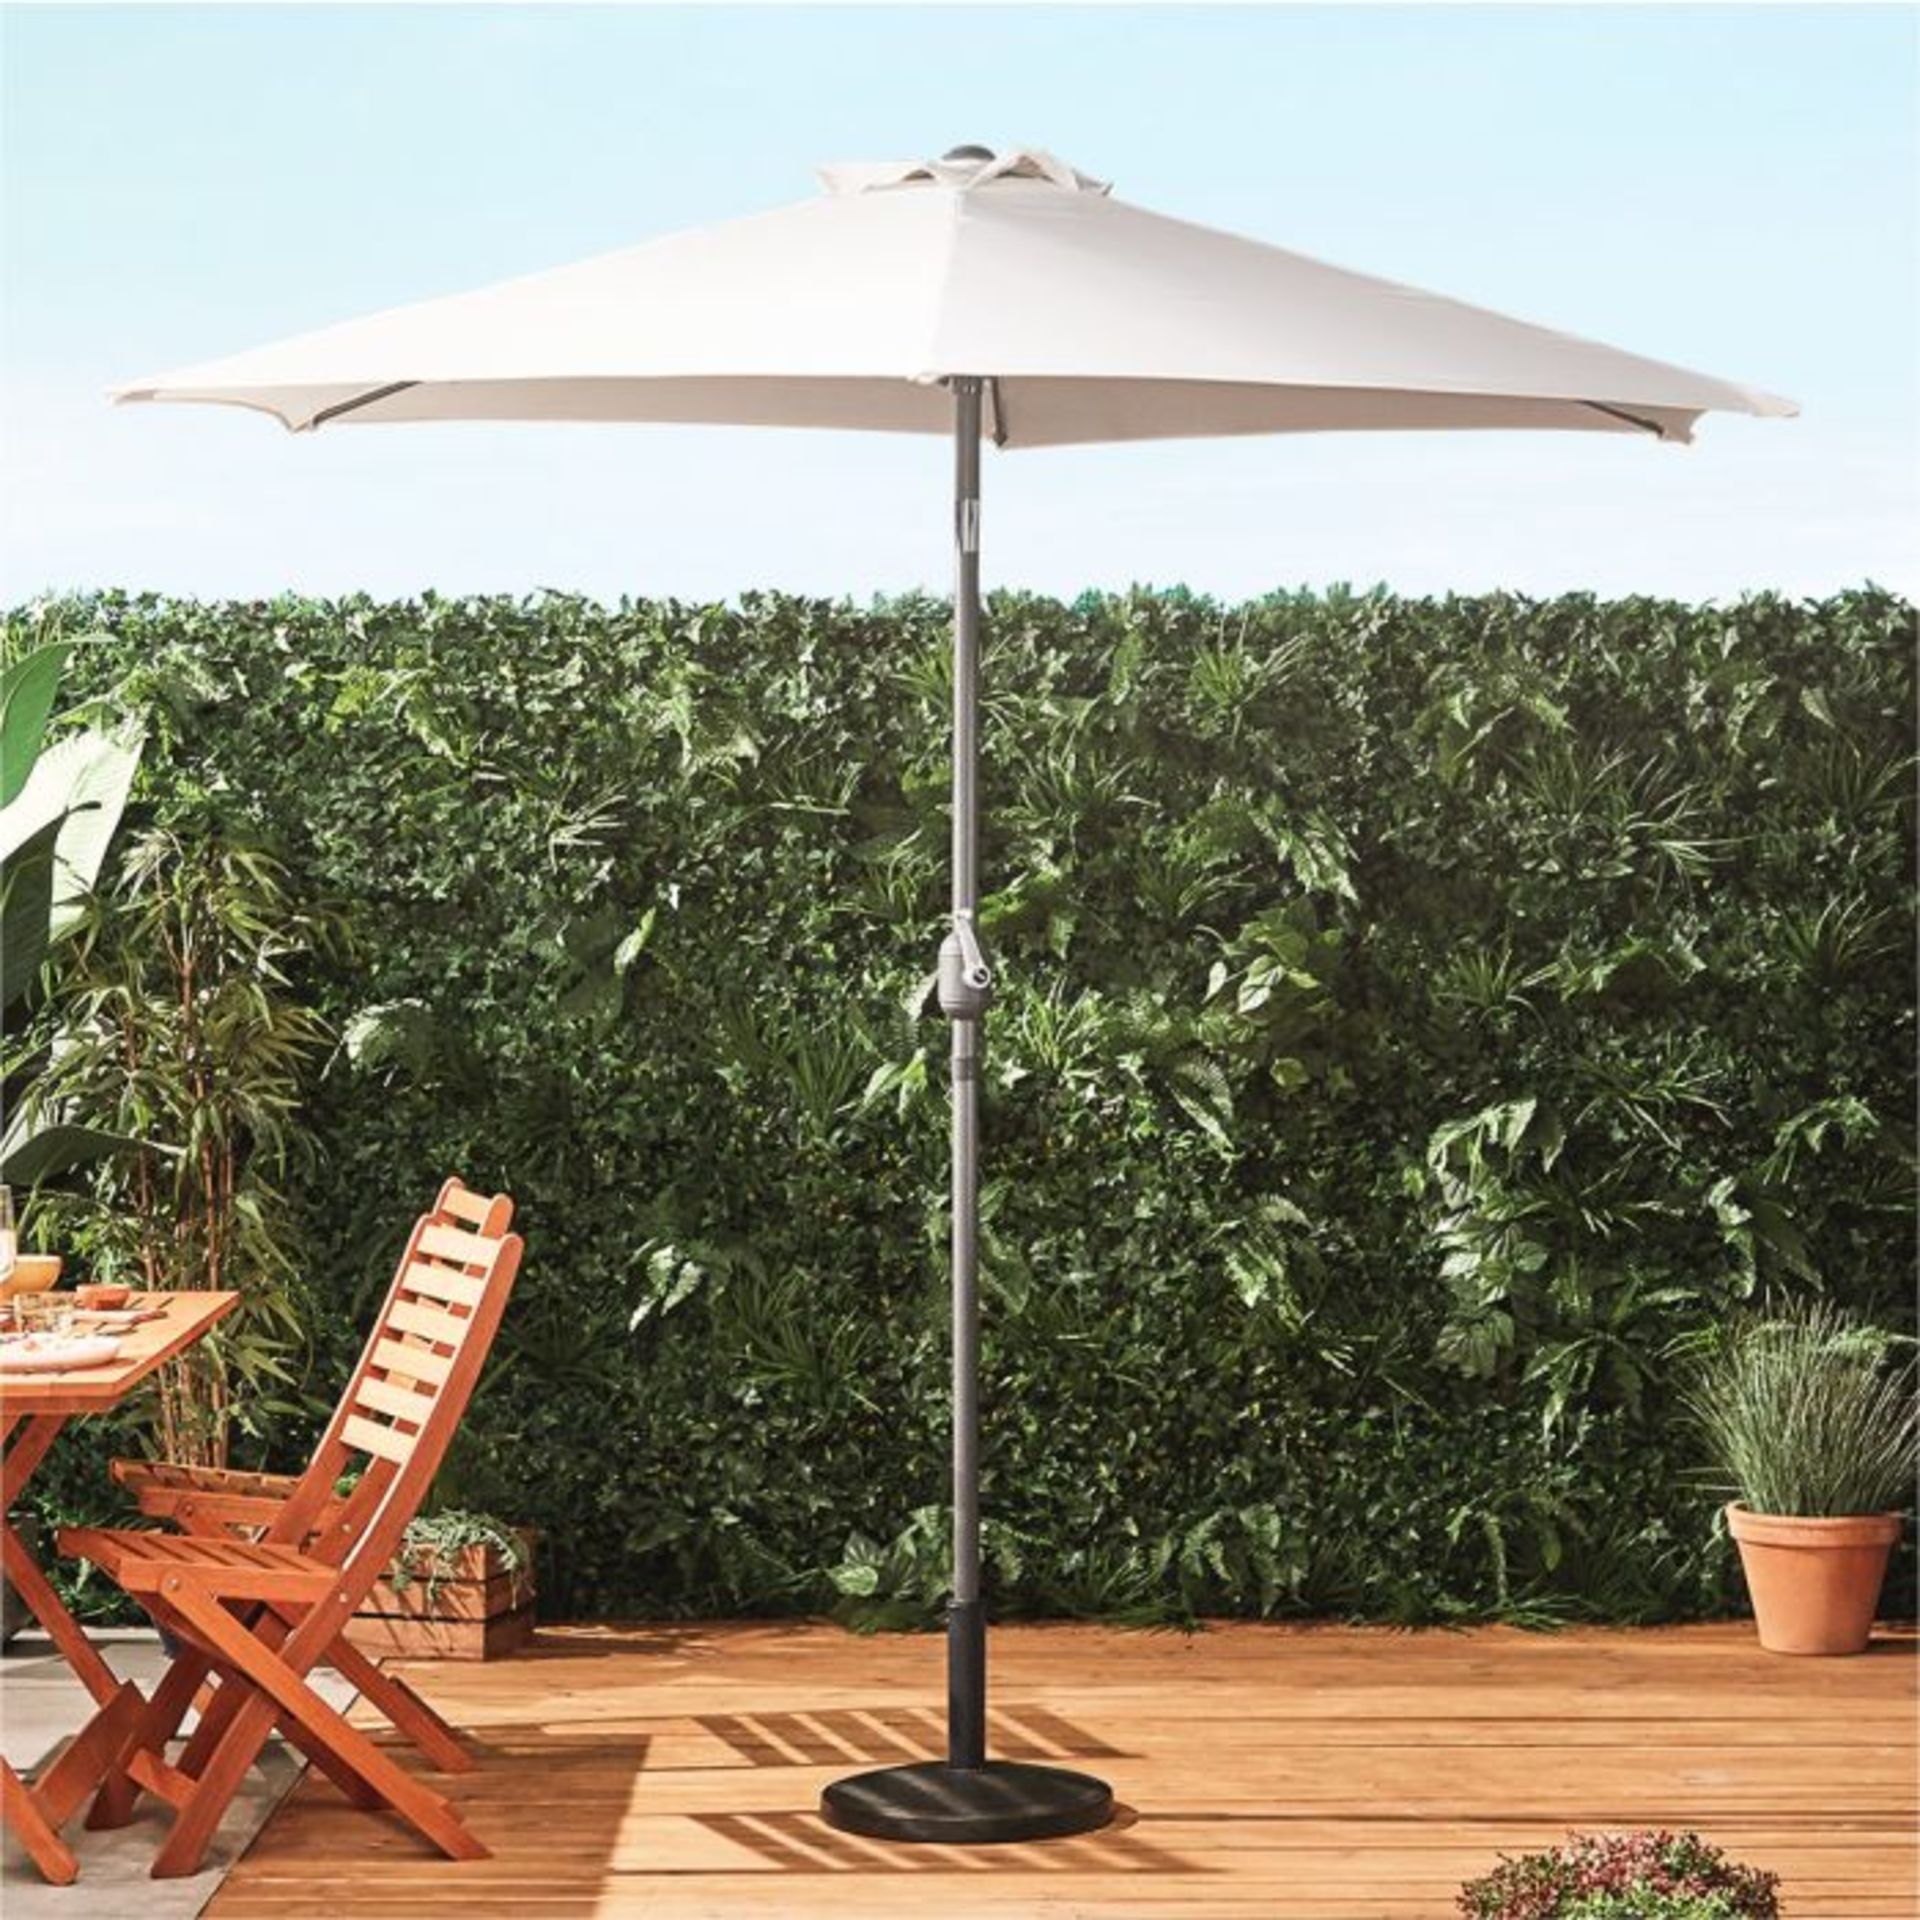 BRAND NEW & BOXED Ivory Cream 2.7m Steel Garden Parasol R10-1. As much as everyone loves a bit of - Image 4 of 4